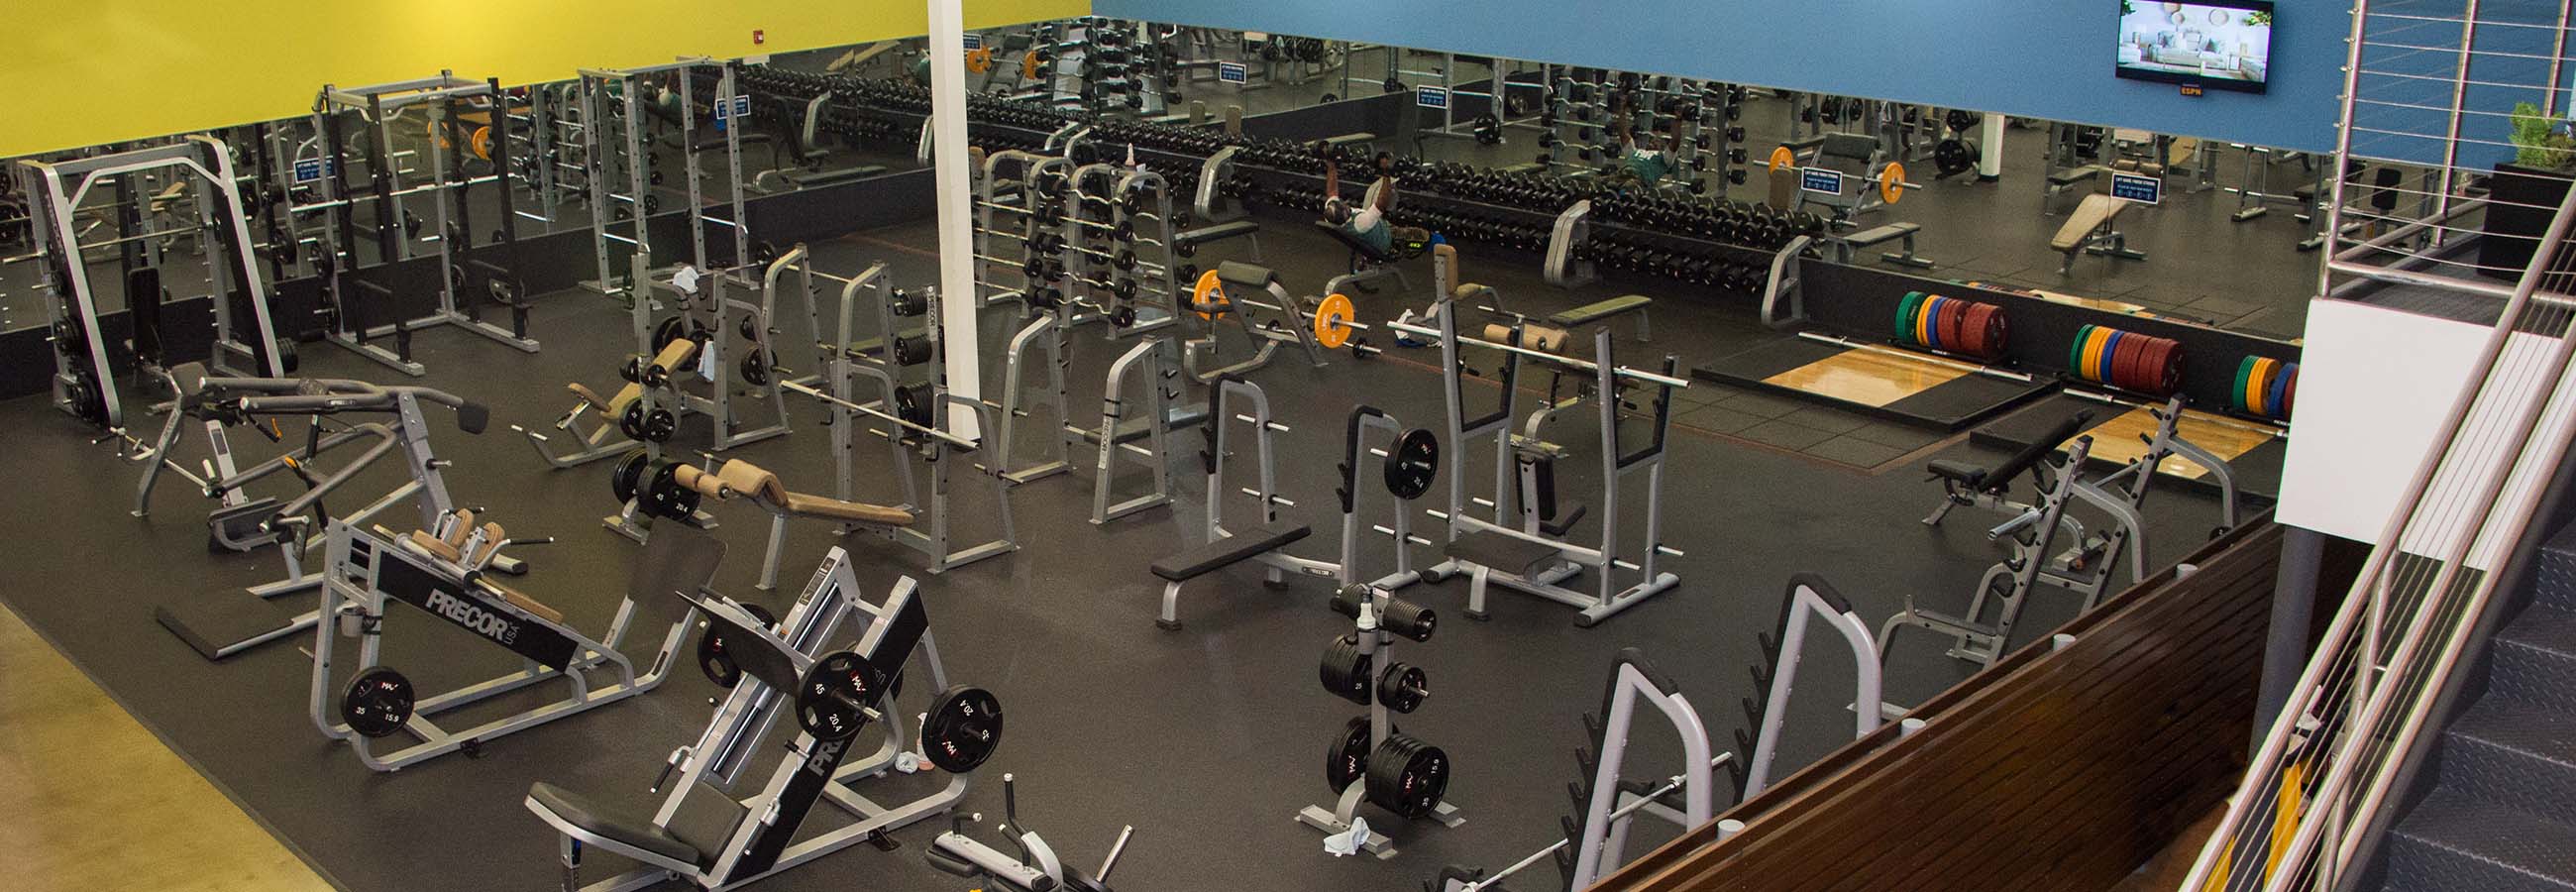 Gyms in Palmdale West, California 93551